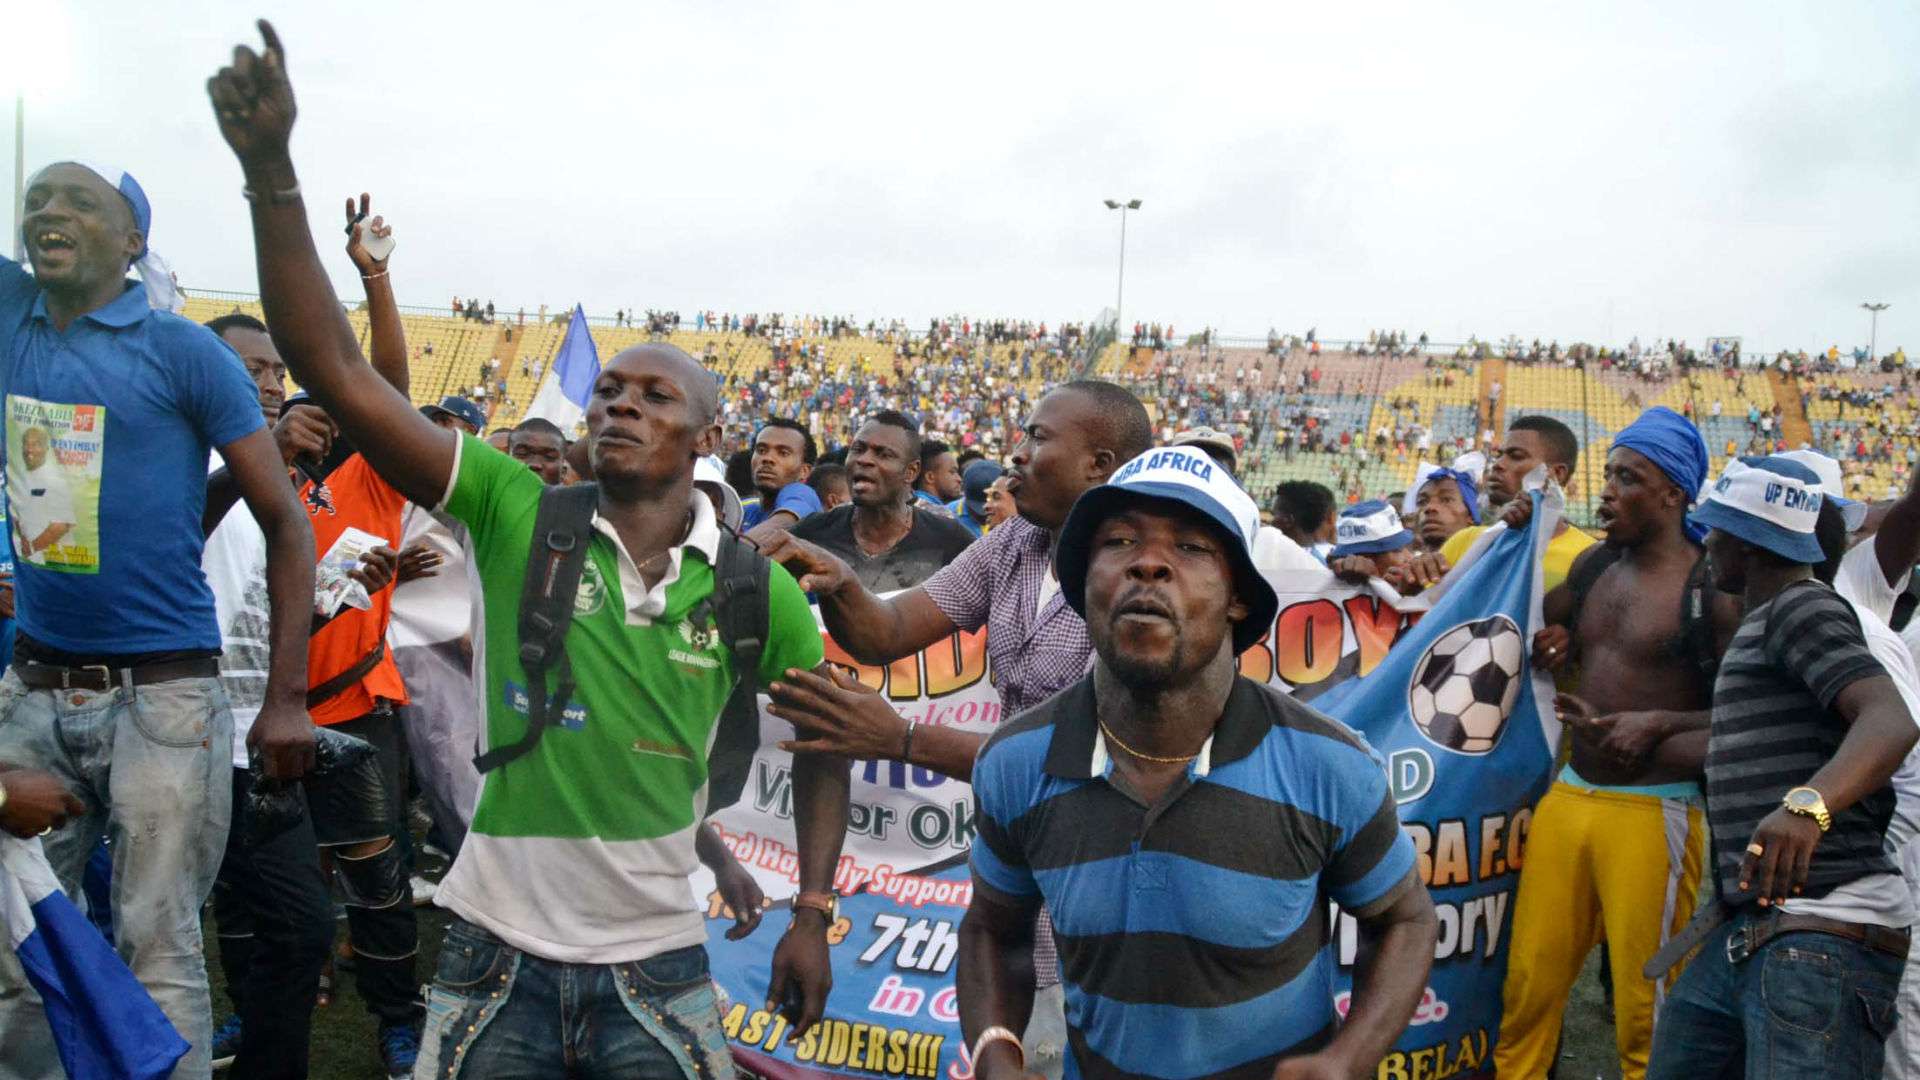 Enyimba fans celebrate winning the Nigeria Professional Footall League title